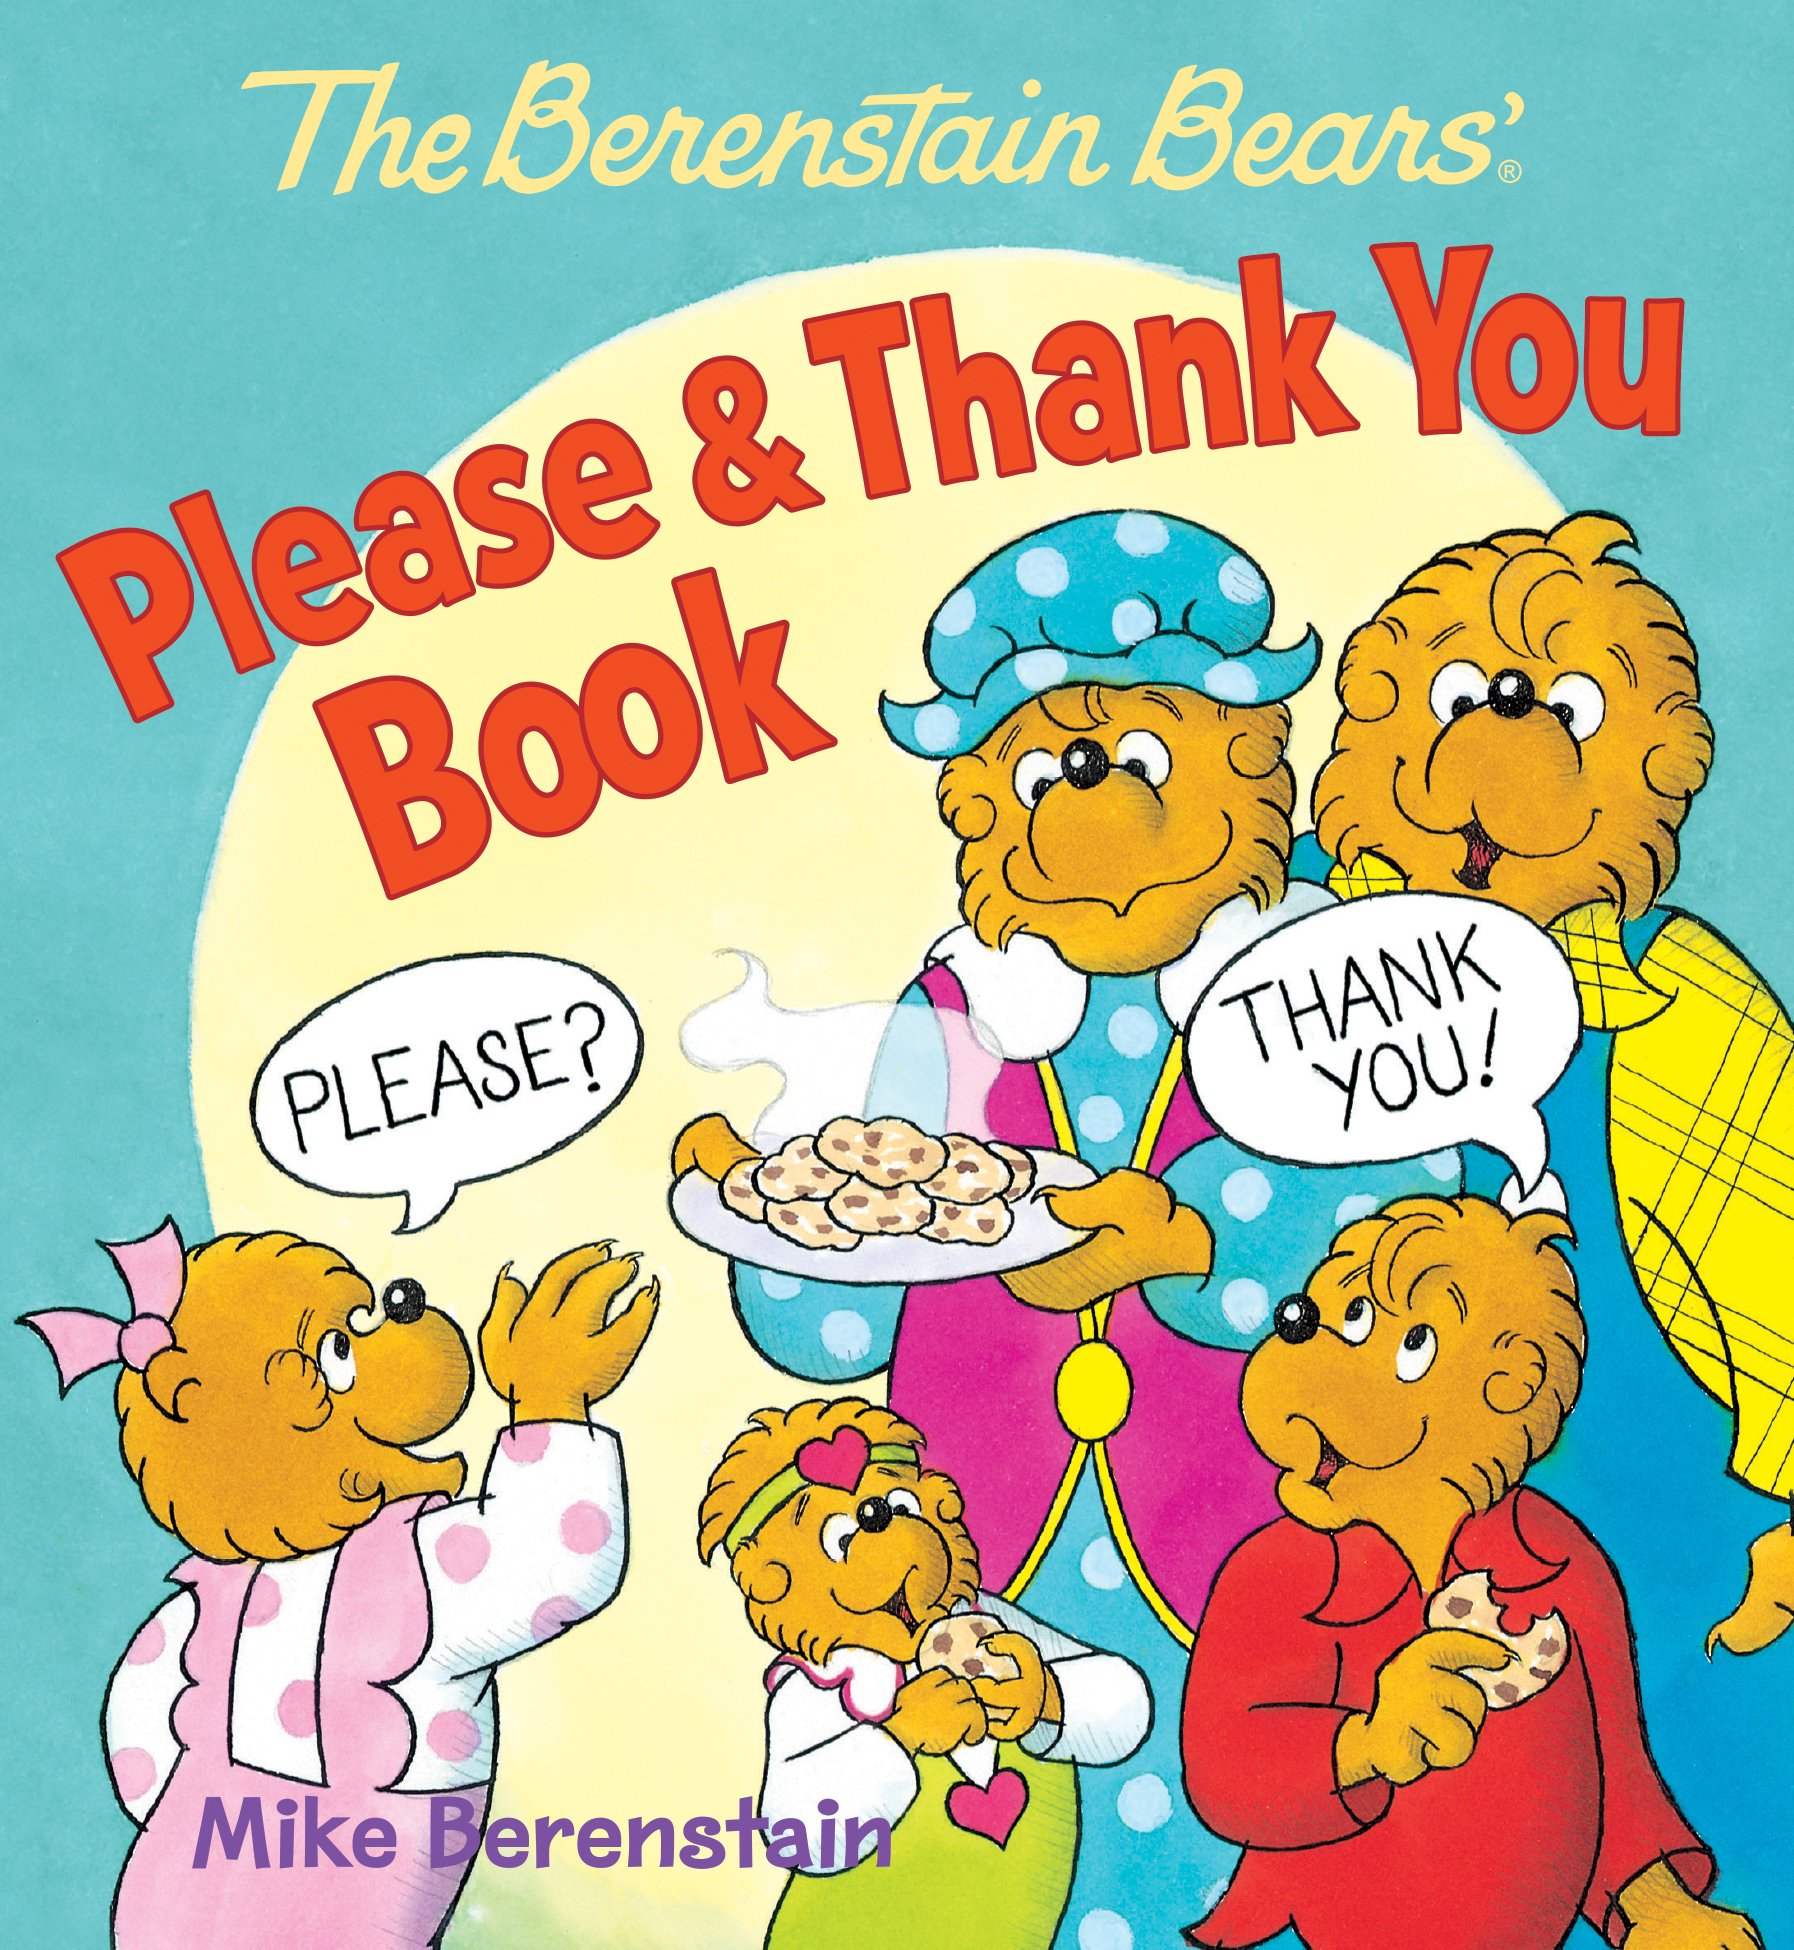 Book Review: The Berenstain Bears’ Please & Thank You Book by Mike Berenstain